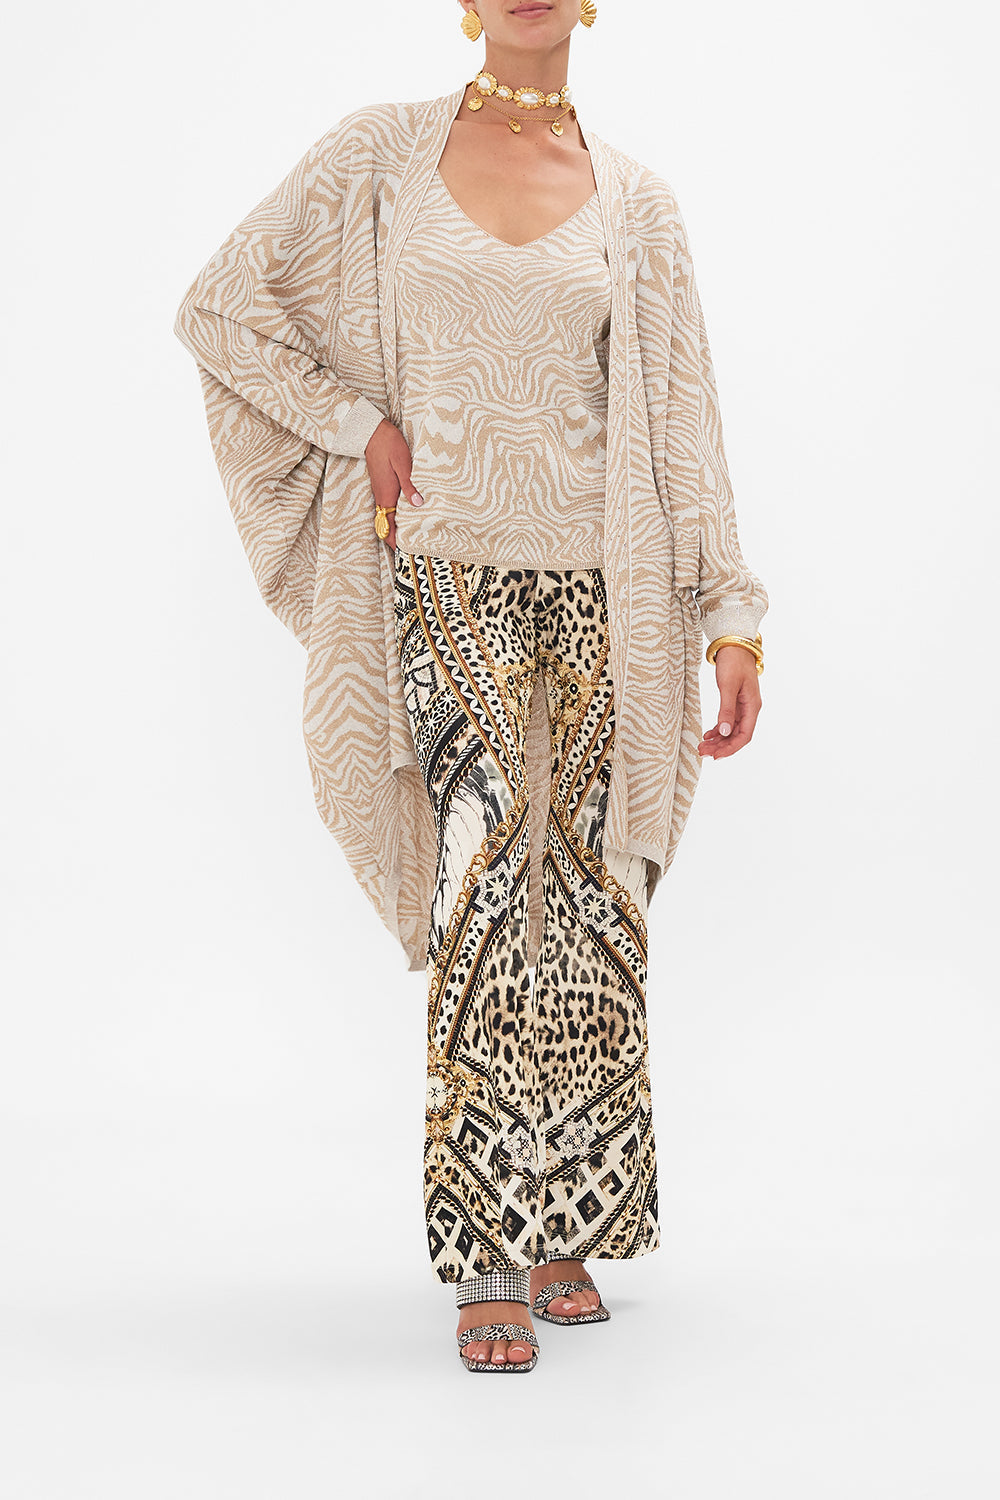 Style view of model wearing CAMILLA designer animal print knit top in Mosaic Muse 